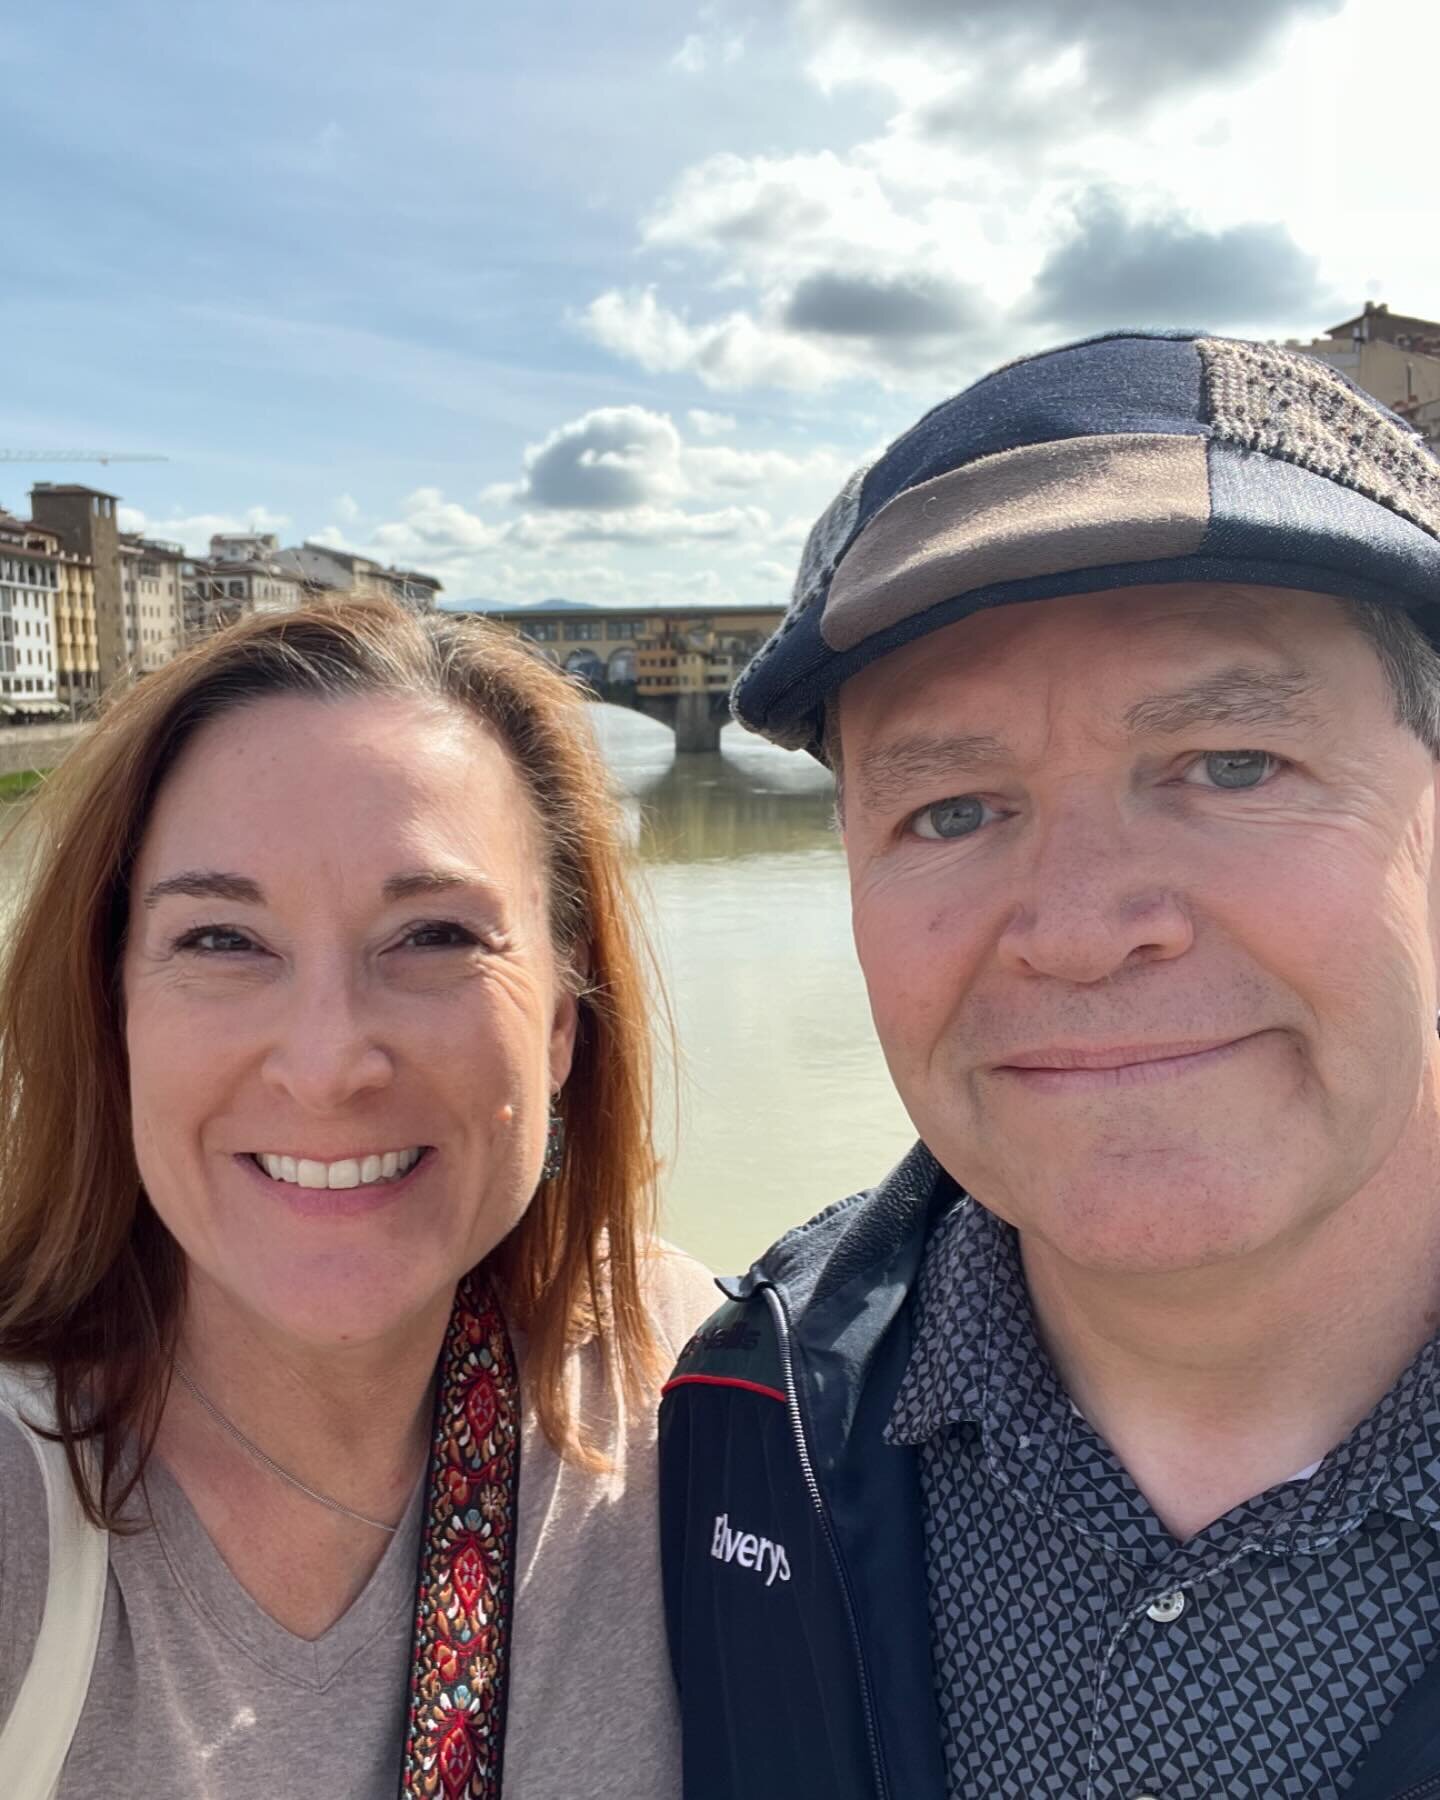 Florence, Italy &mdash; Days 8 &ndash; 11
What a beautiful city &mdash; and well deserving of being called the birthplace of the Renaissance. 

We followed another @ricksteveseurope tour through the city, ogled at the enormity of the Doumo, stopped a